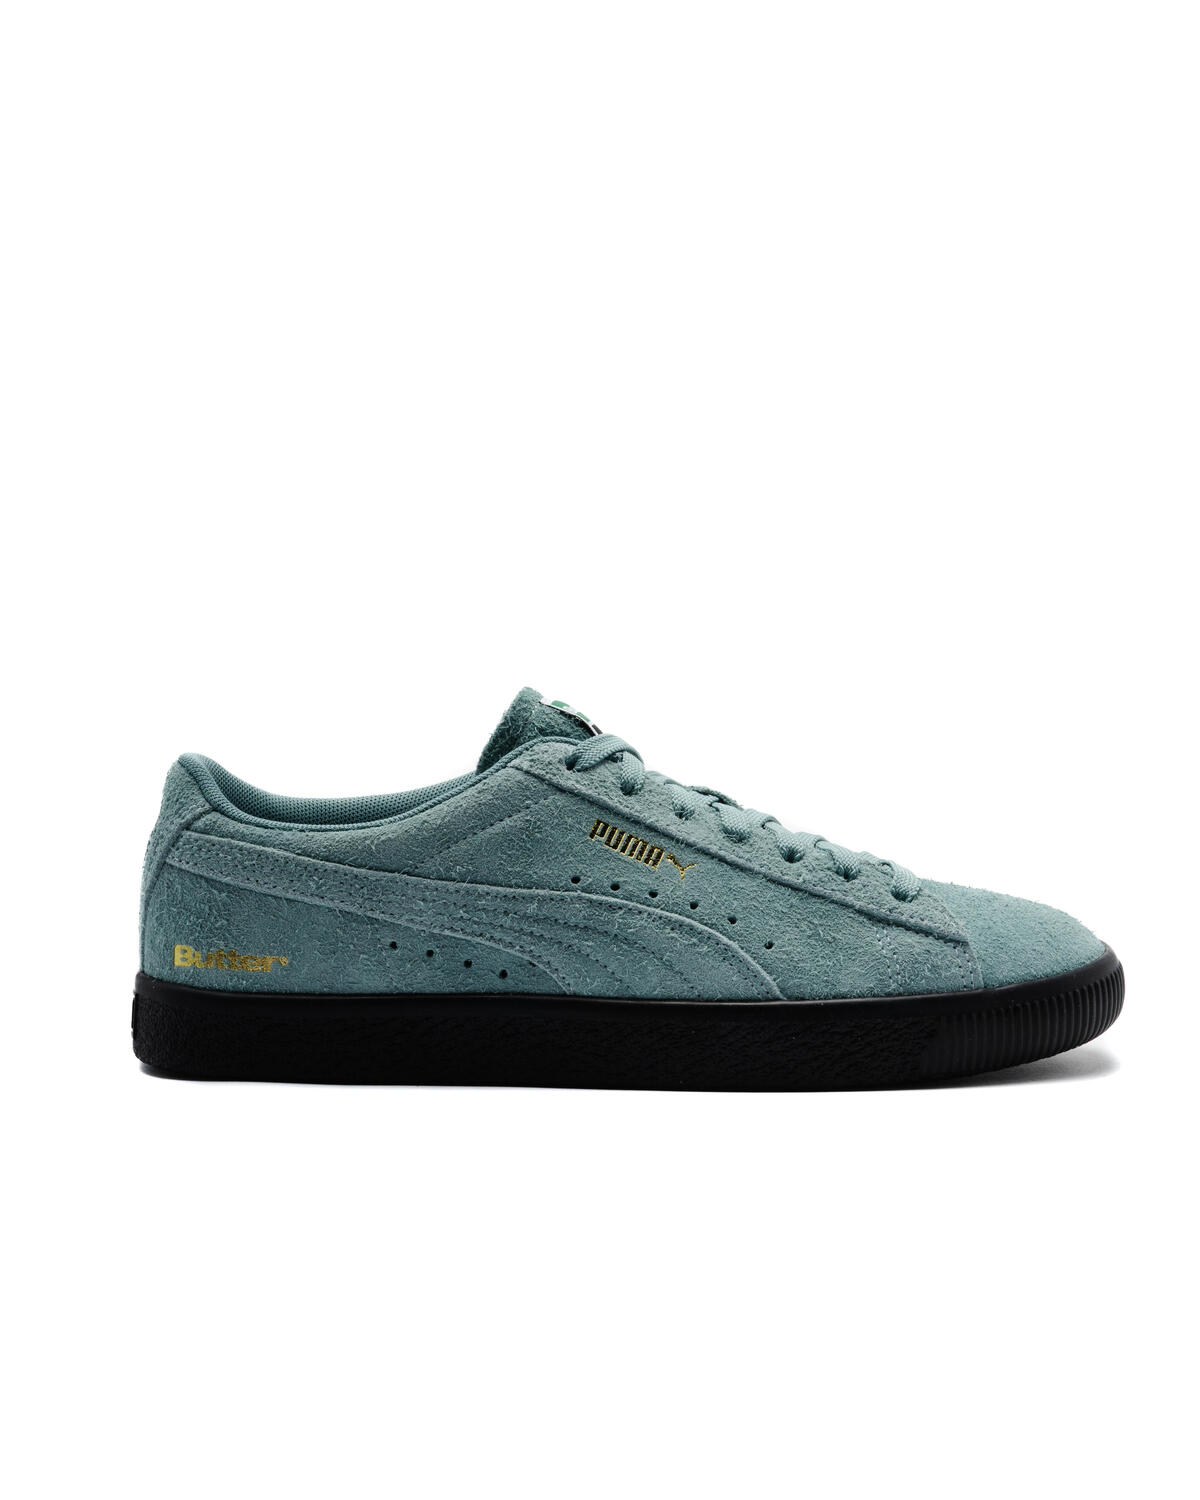 384360 | NwfpsShops STORE - 01 | Puma x Butter Goods Suede VTG HS